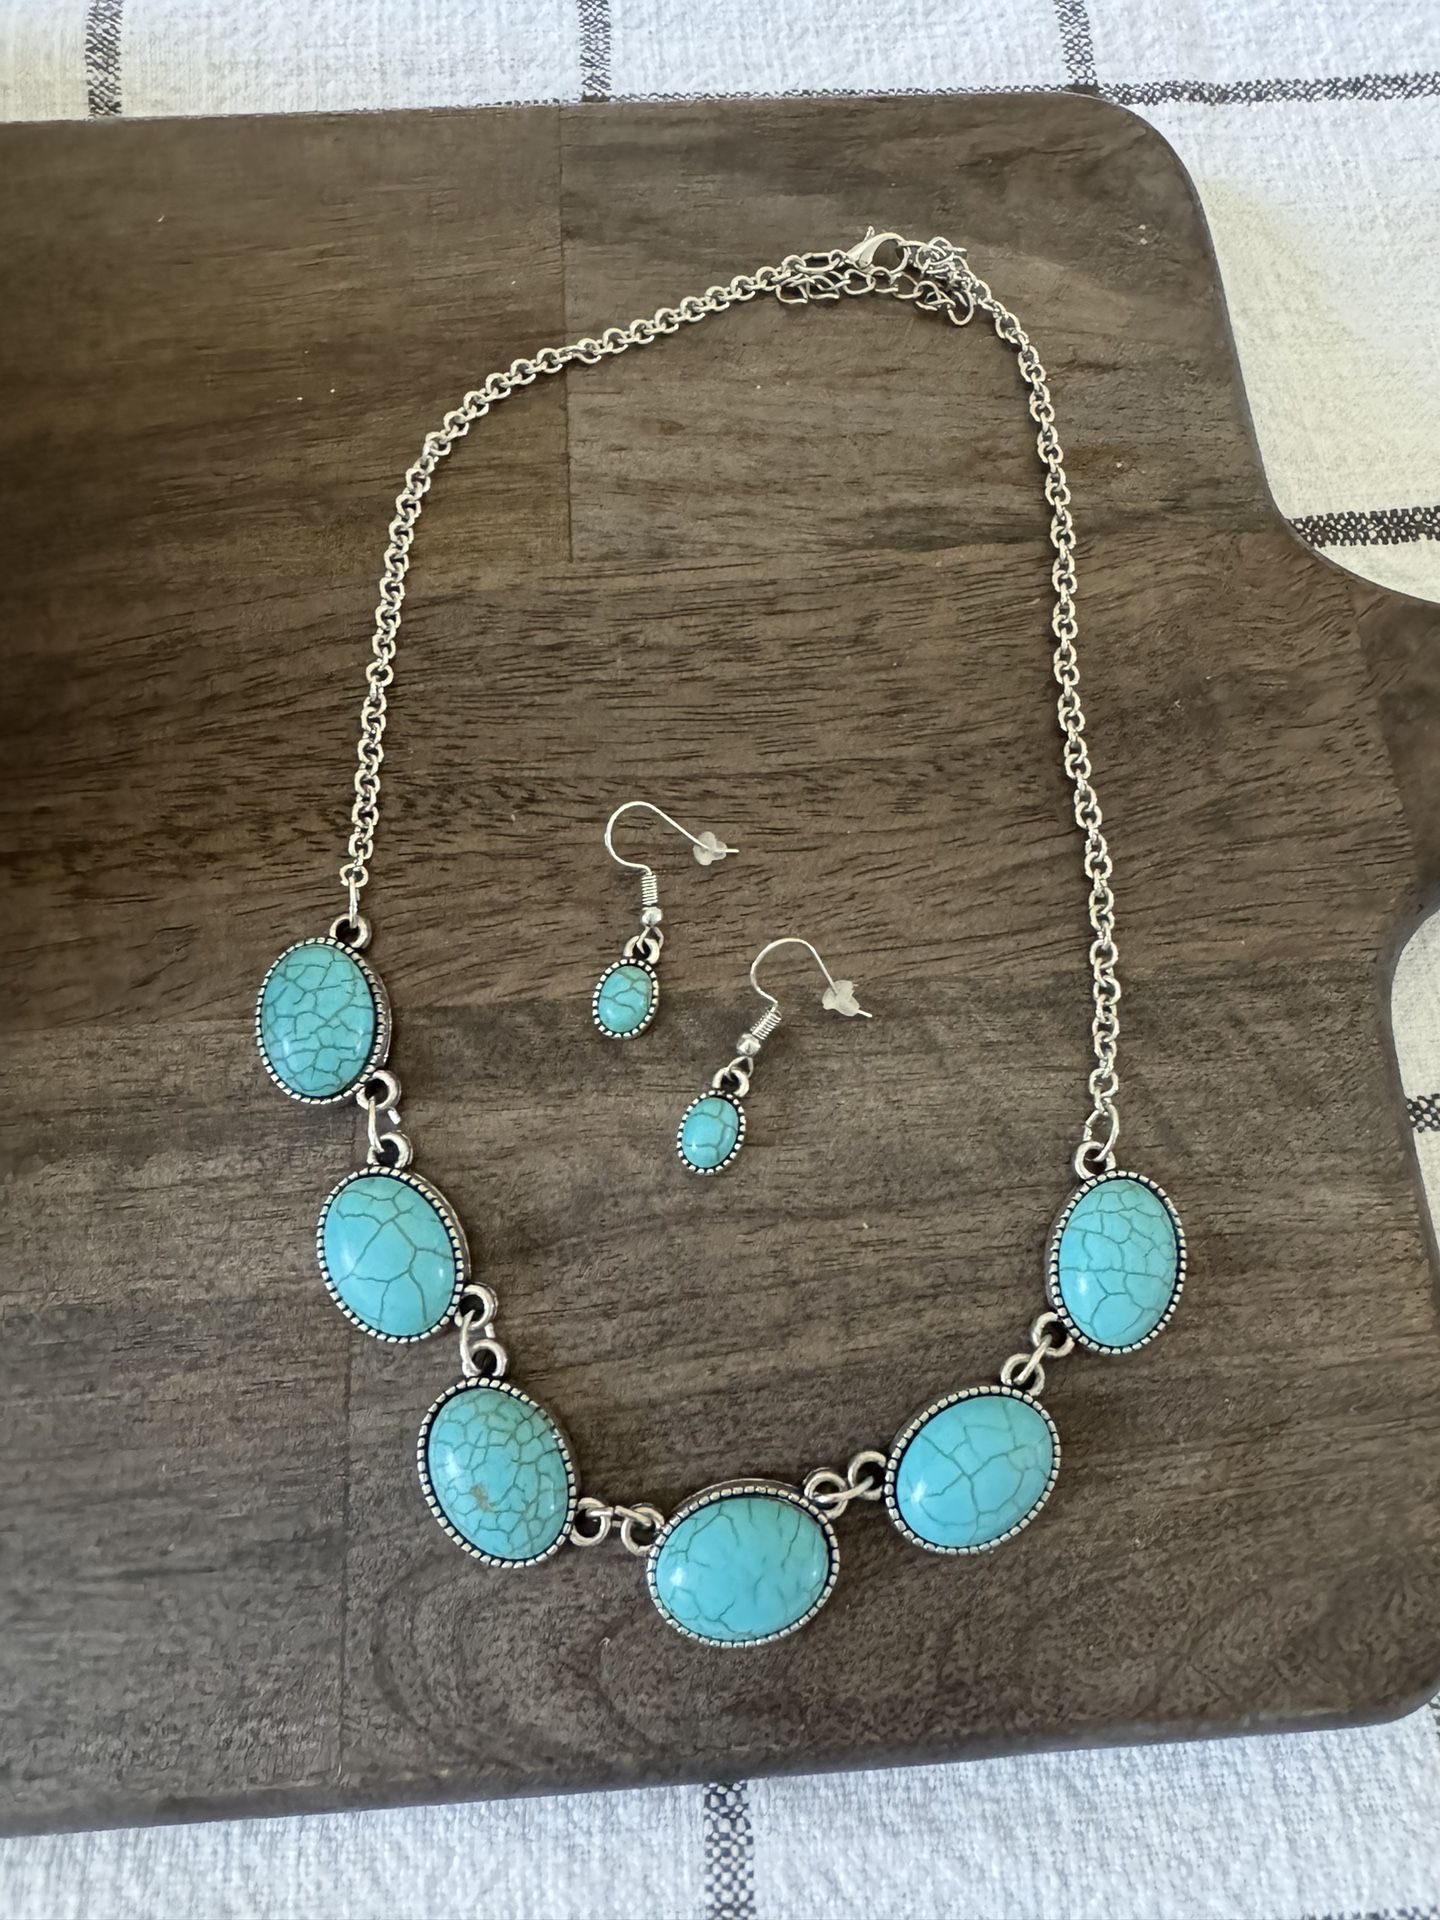 Silvertone And Turquoise Stone Necklace And Earrings Set